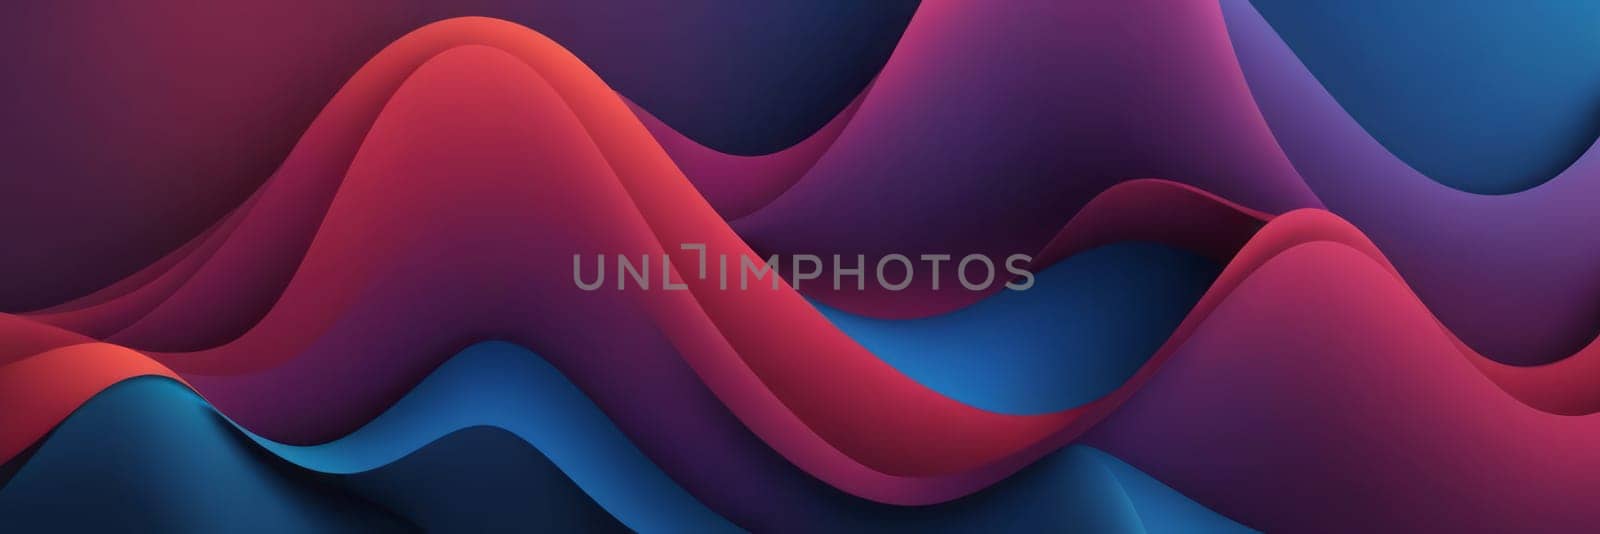 Sigmoid Shapes in Maroon and Midnight blue by nkotlyar